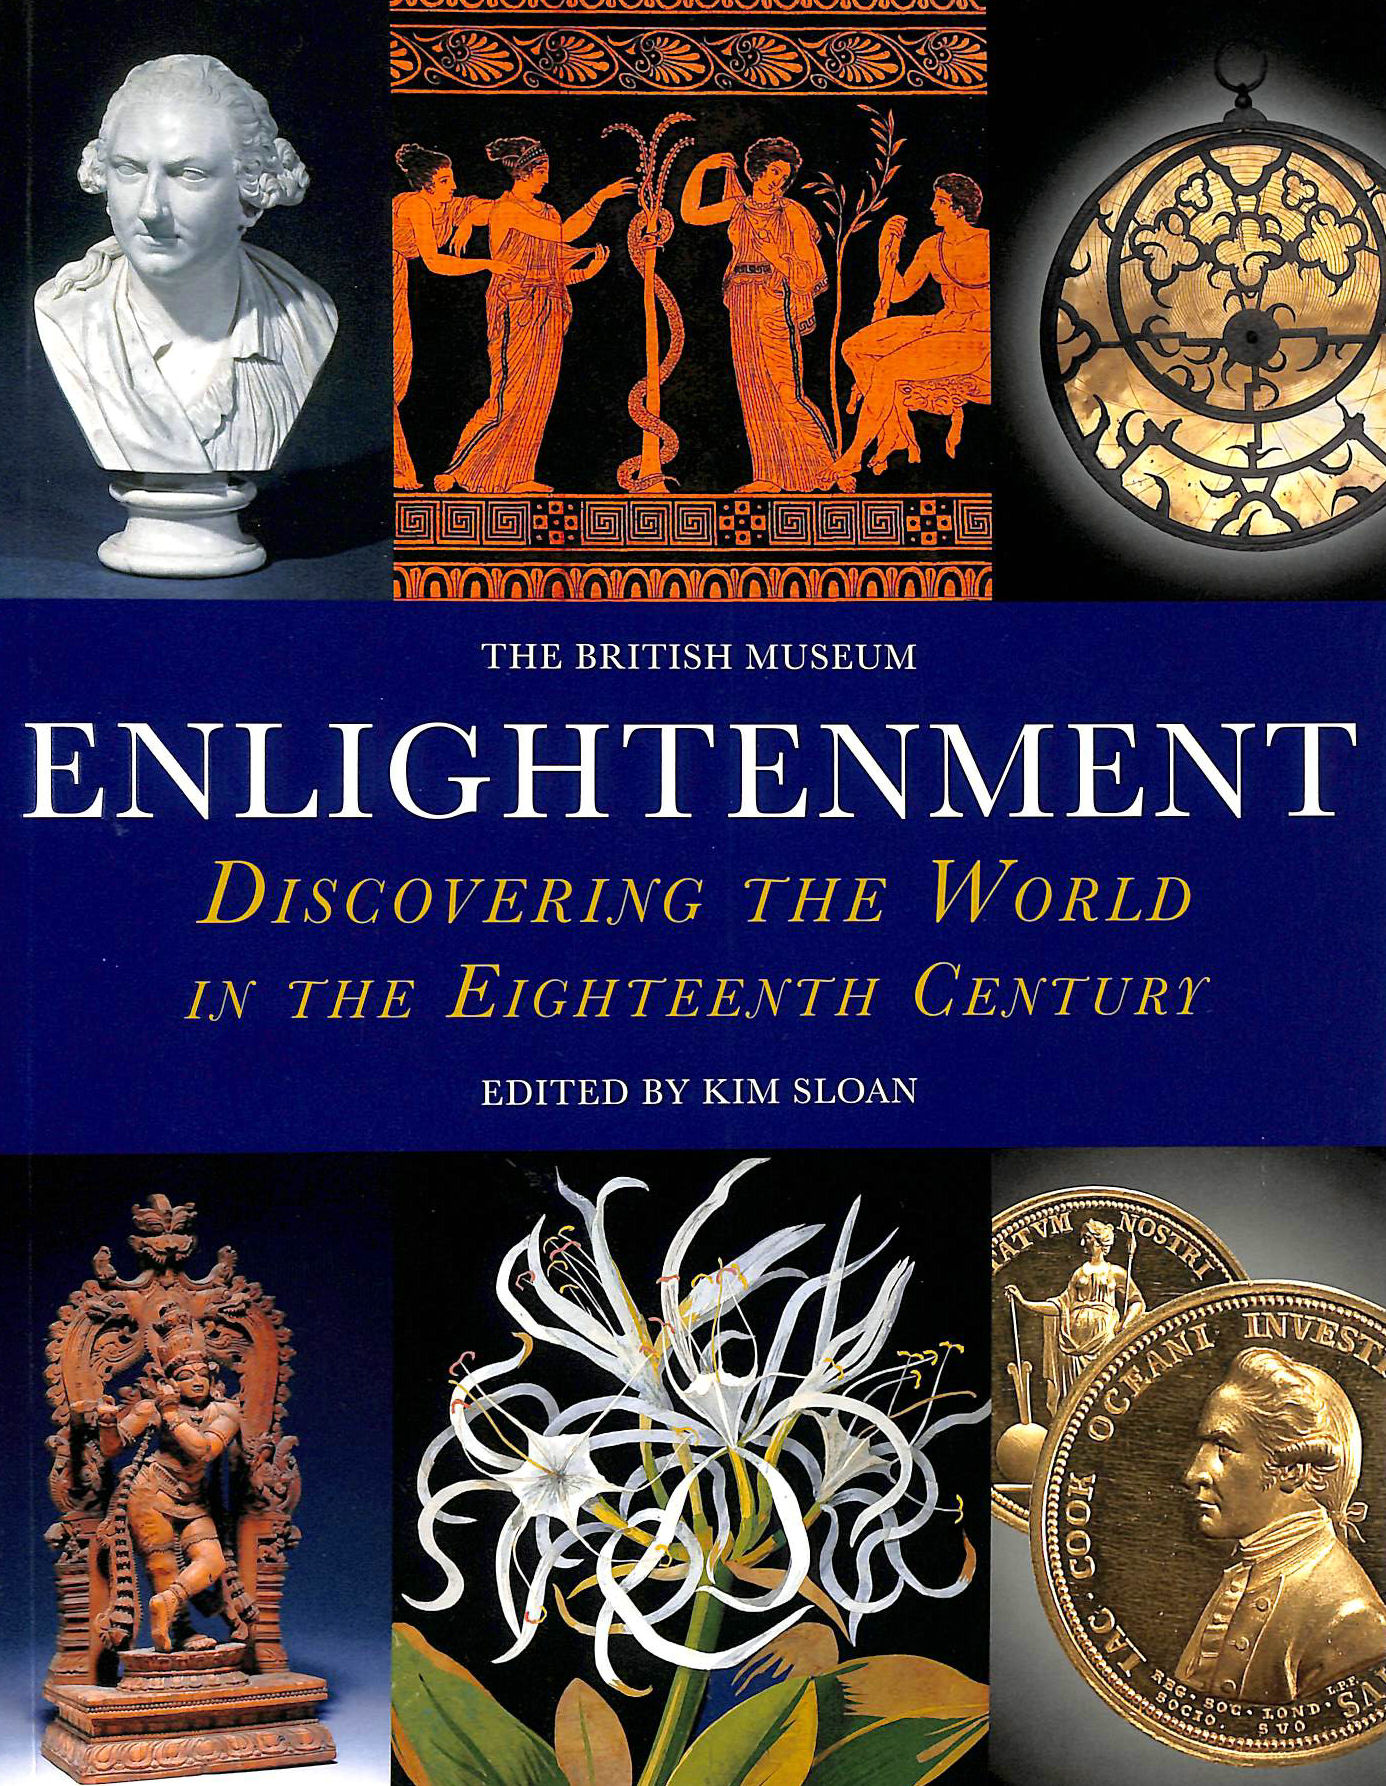 KIM SLOAN [EDITOR] - Enlightenment: Discovering the World in the Eighteenth Century